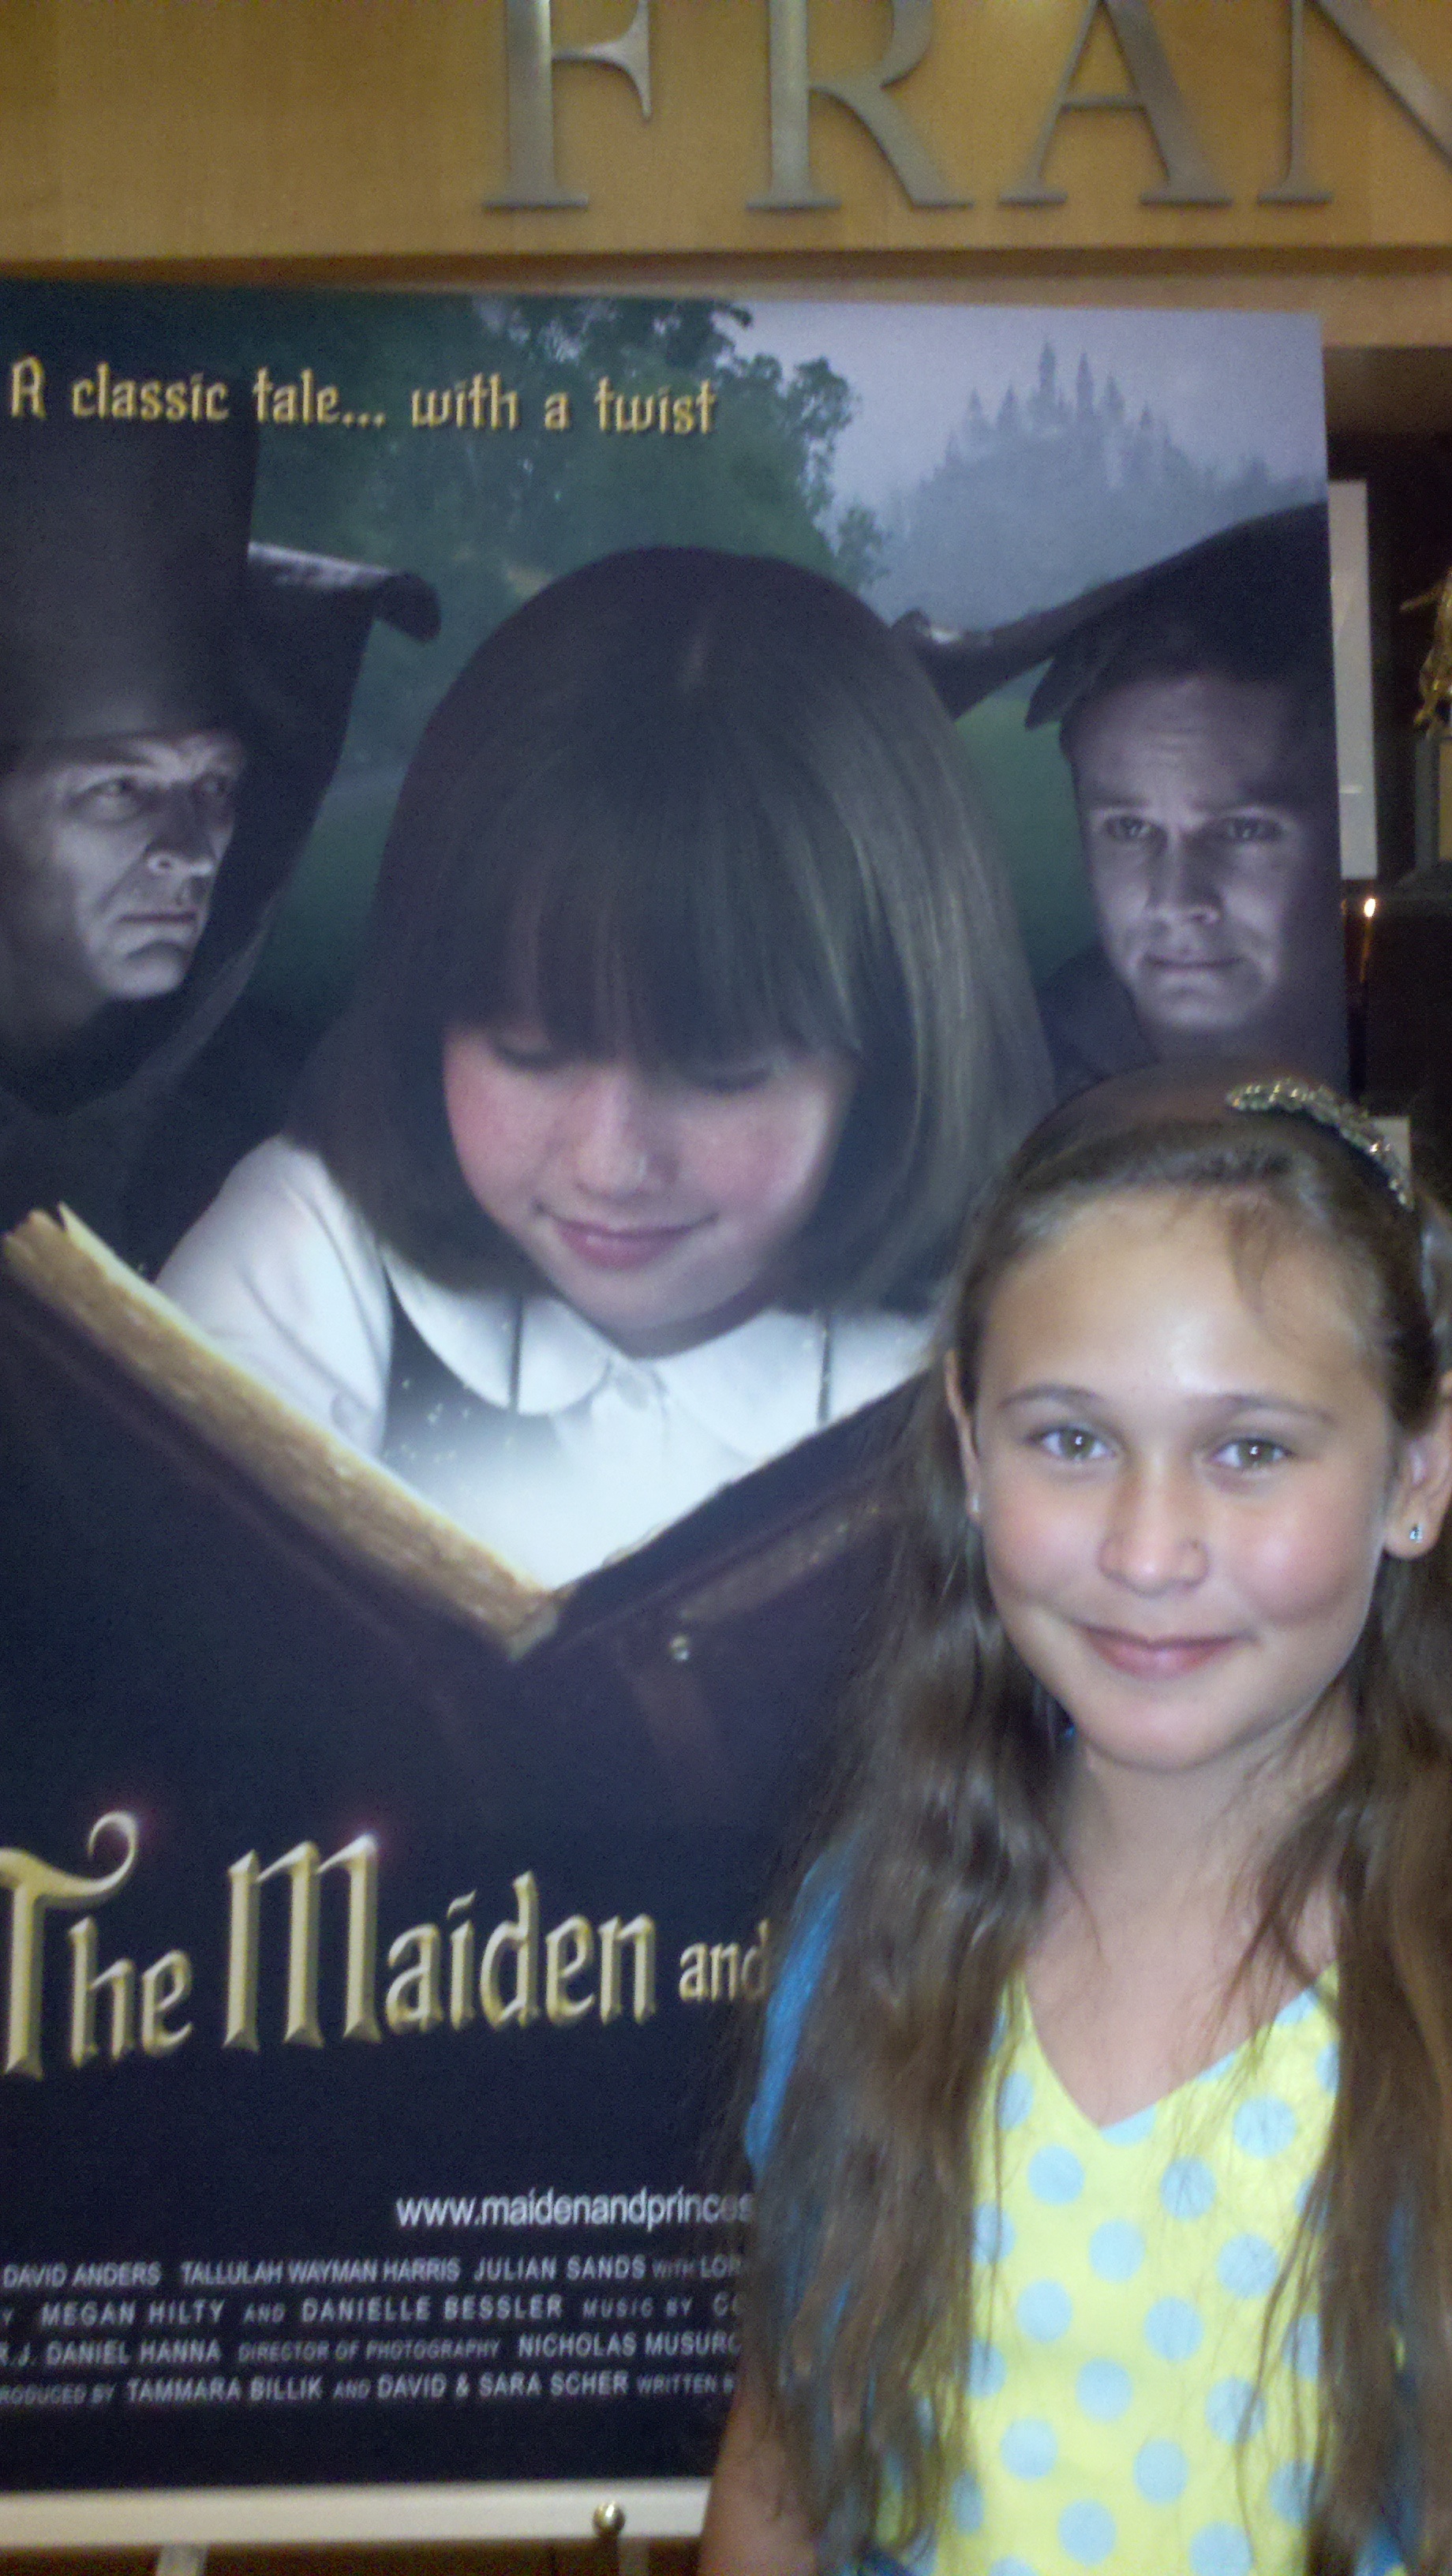 Maiden and the Princess Premier